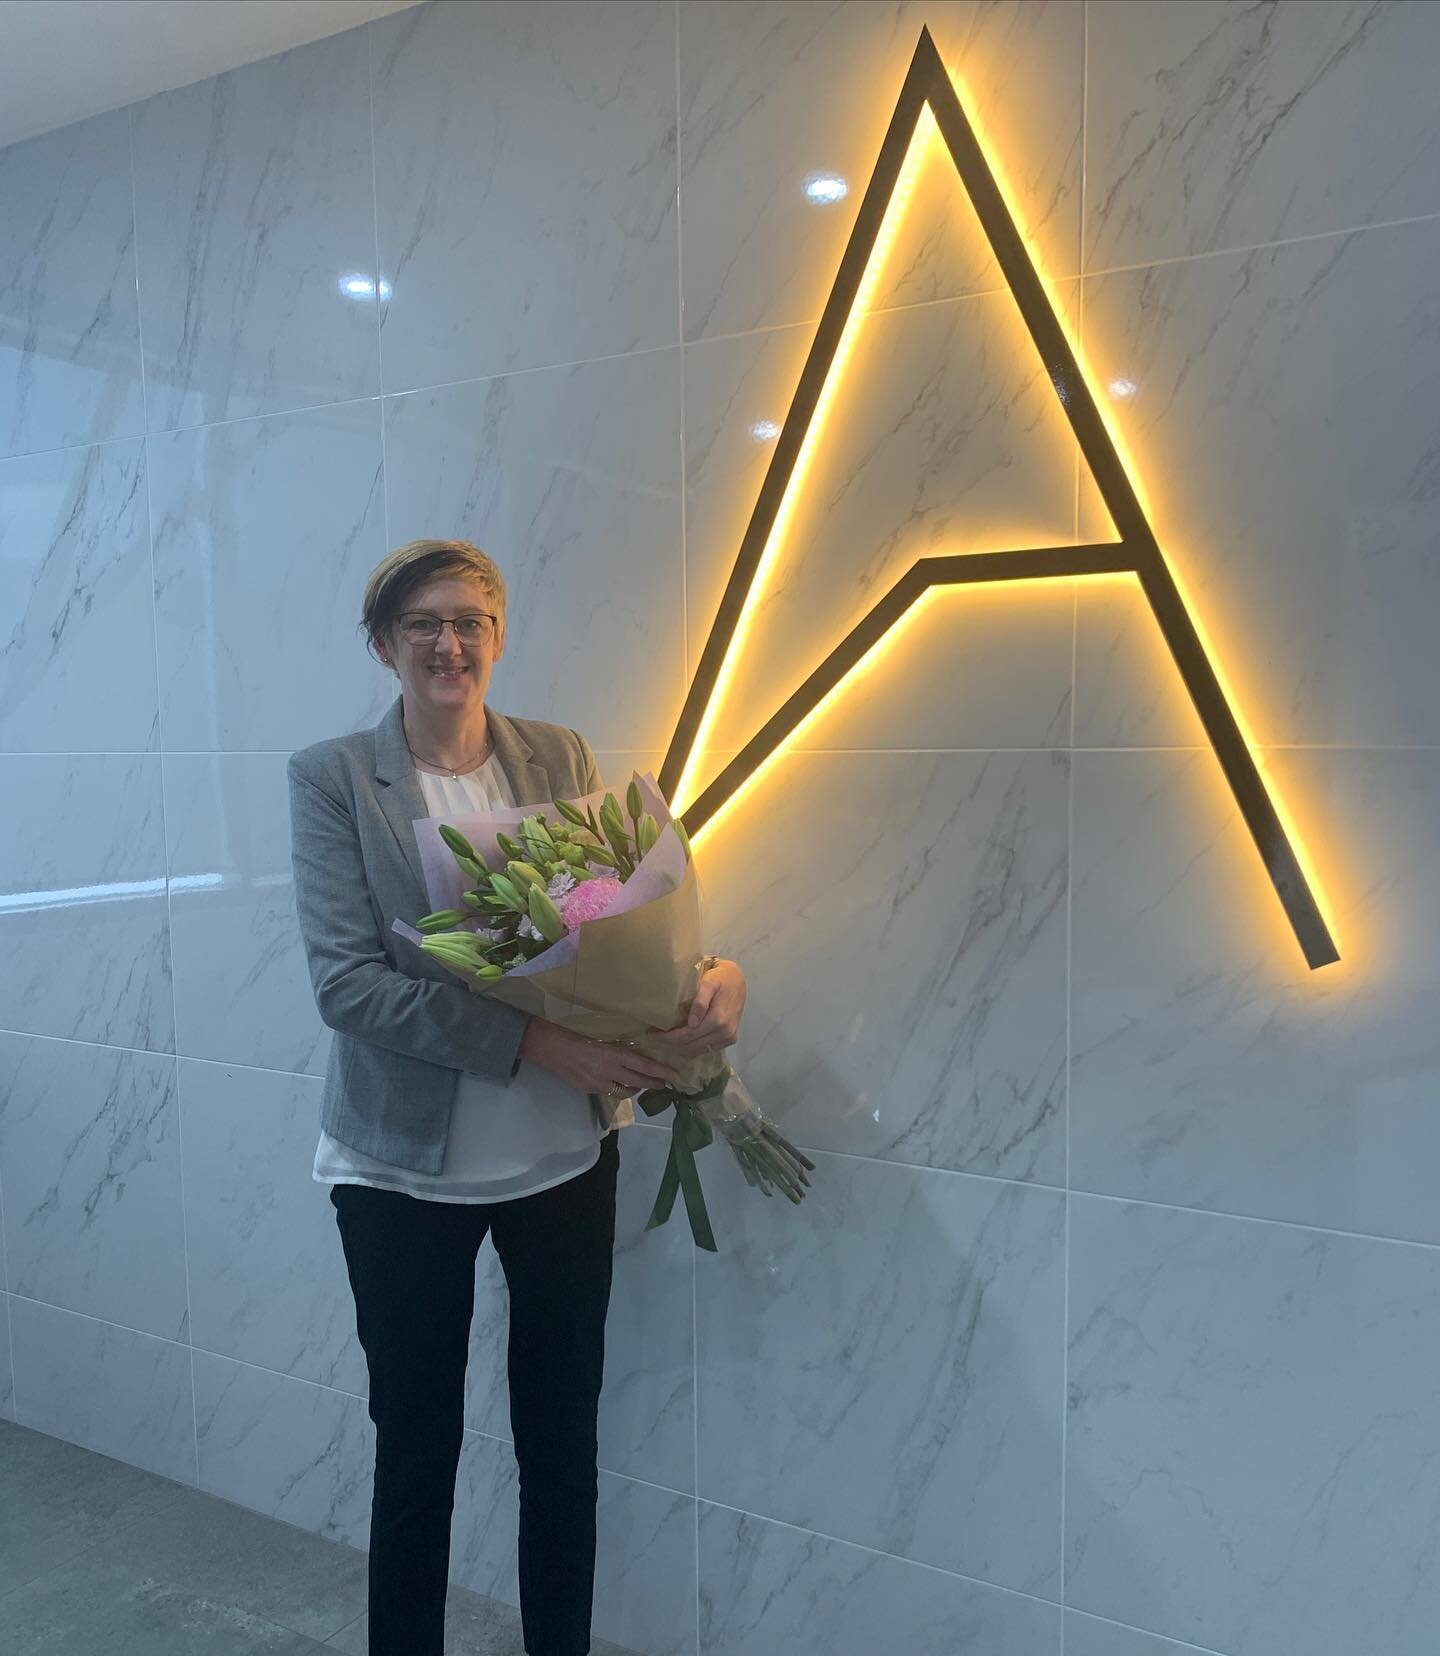 Wow 1 year already! What an incredible asset to our team Anna has been. As Paul&rsquo;s assistant she has helped our business in so many ways and we cannot express how lucky we are to have her!